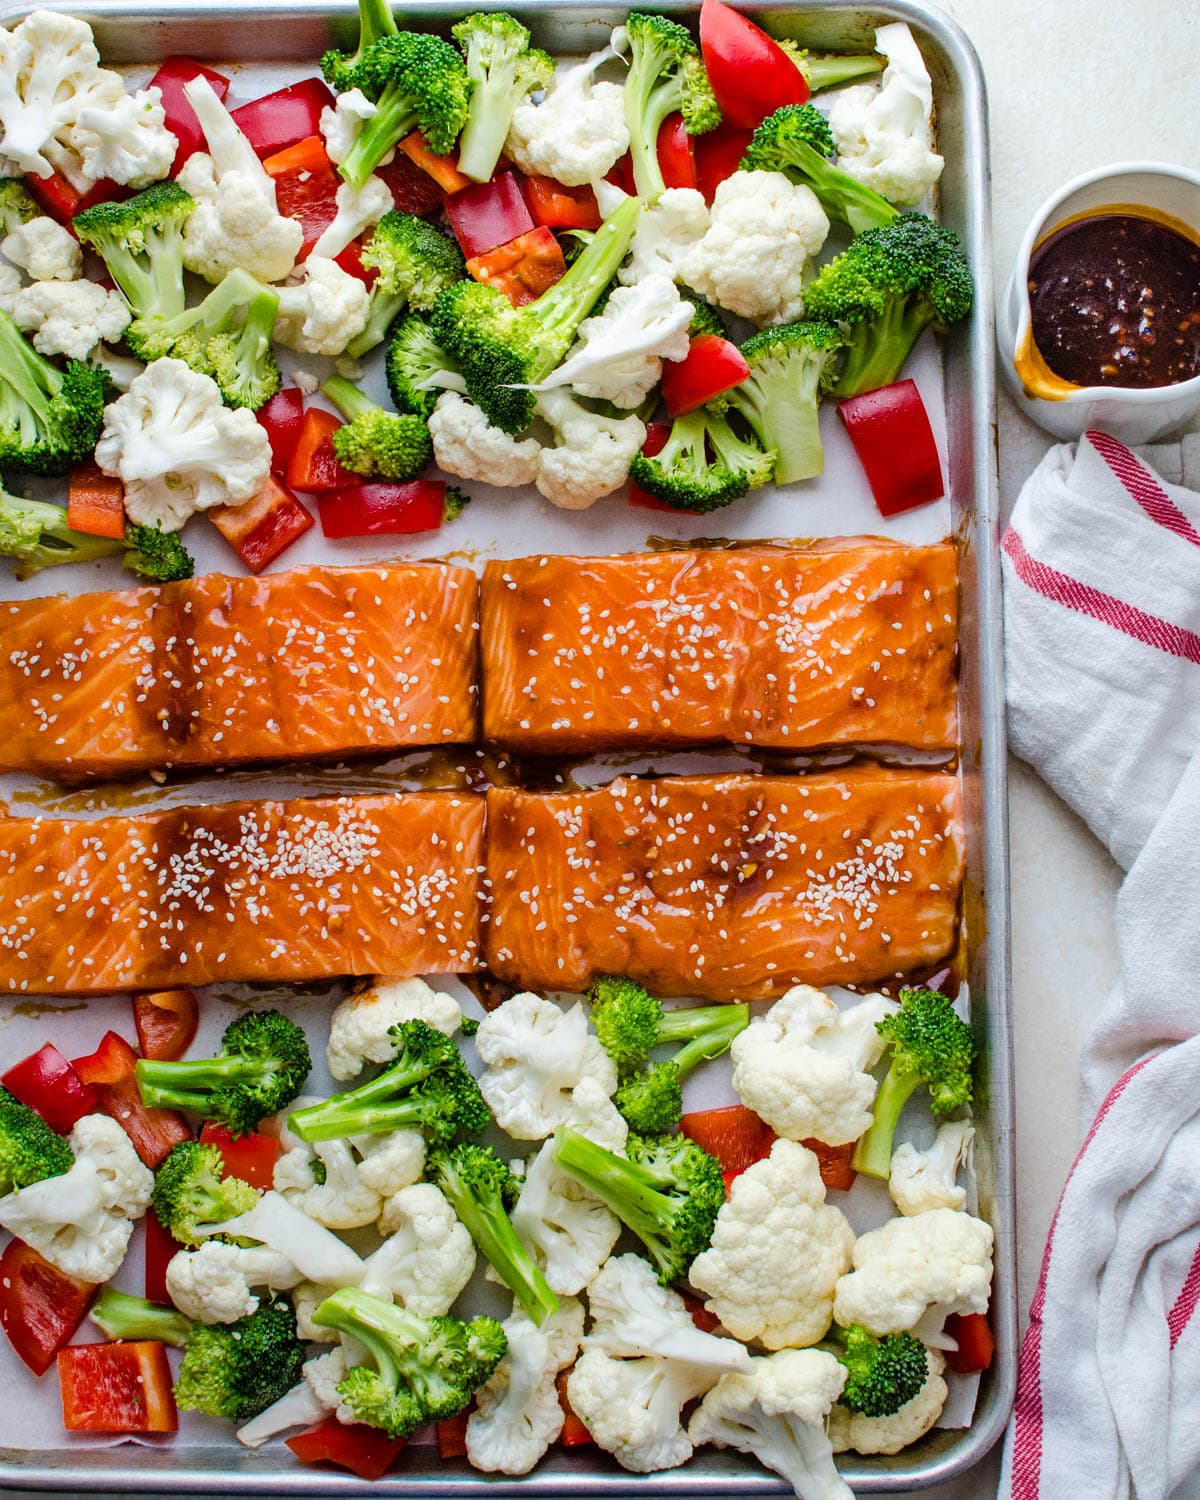 Arranging the vegetables and salmon on a sheet pan.